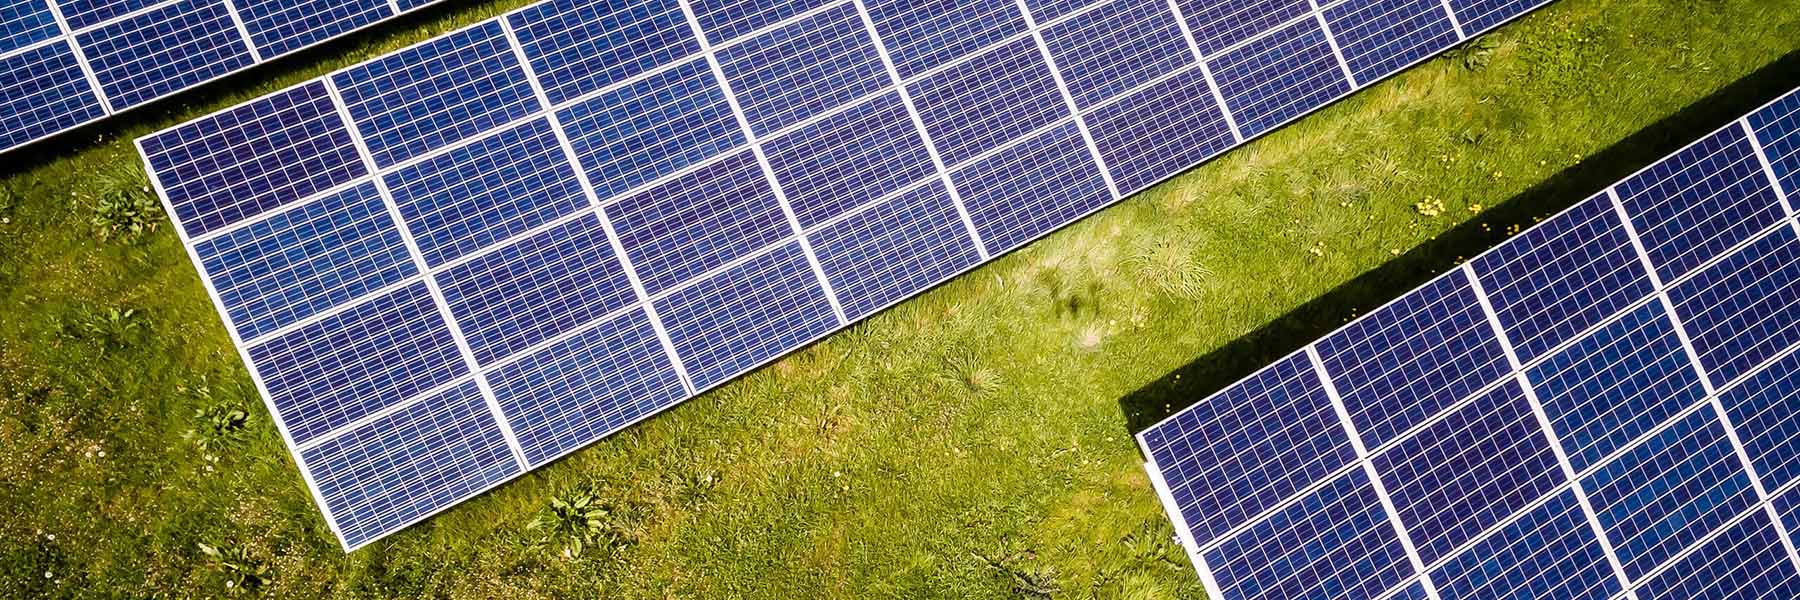 Top-down view of solar panels on a grassy field. Photo by Andreas Gücklhorn on Unsplash.